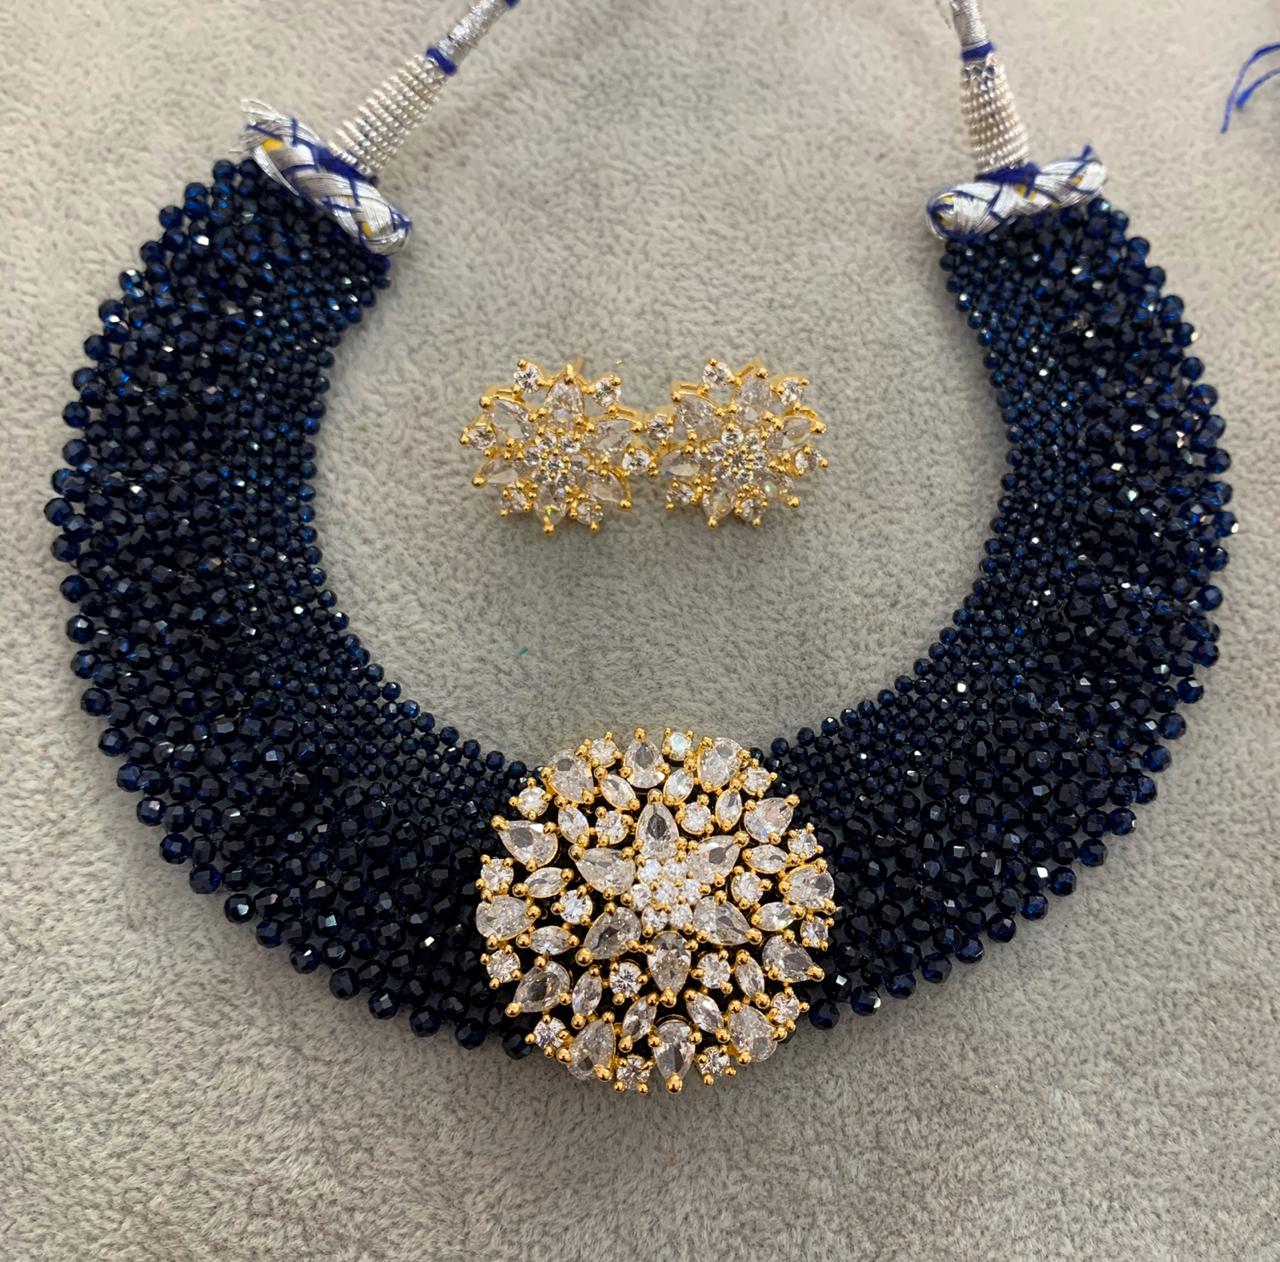 Sale!!-Beaded Necklace-Beaded Jewellery-Beads Necklace-Blue Bead Necklace-Blue  Necklace-Navy Blue Necklace-Side Pendants Indian-Gift-Fashion | Beaded  necklace, Blue necklace, Beaded jewelry